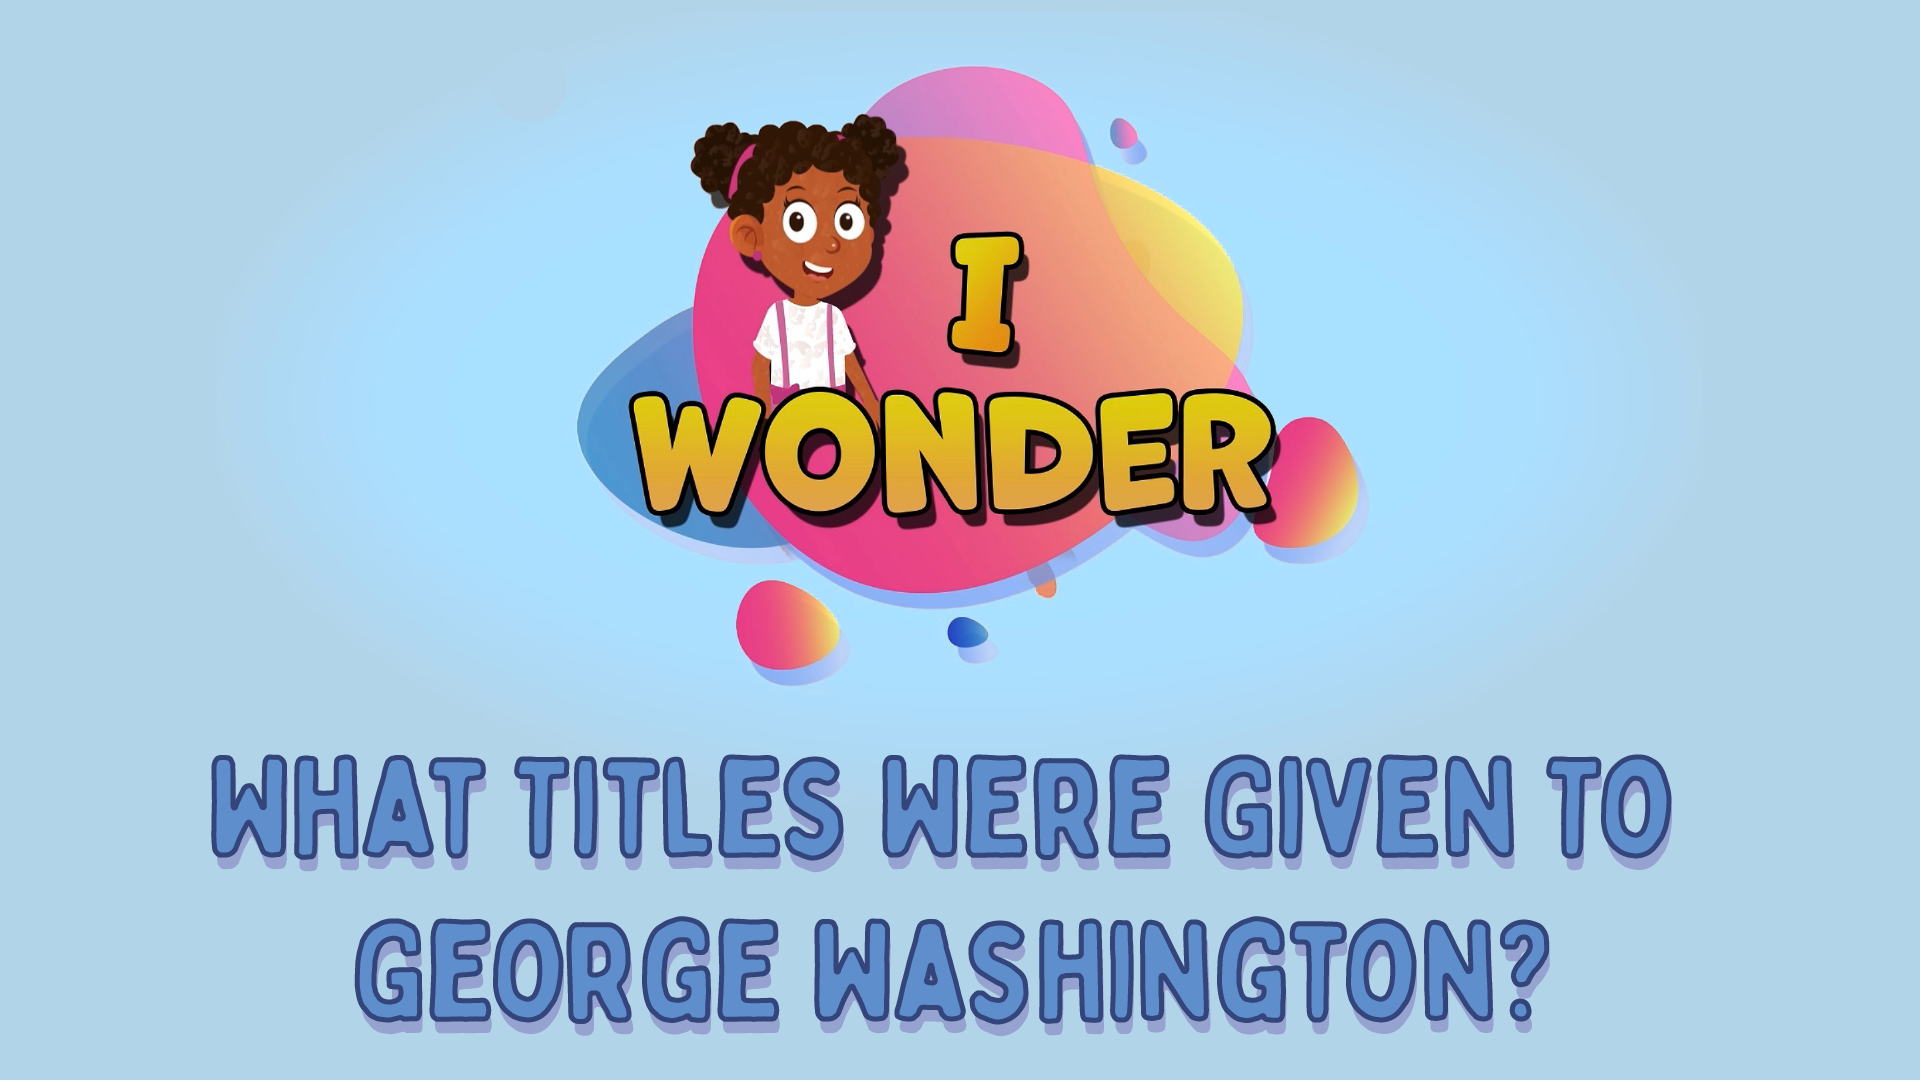 What Titles Were Given To George Washington?